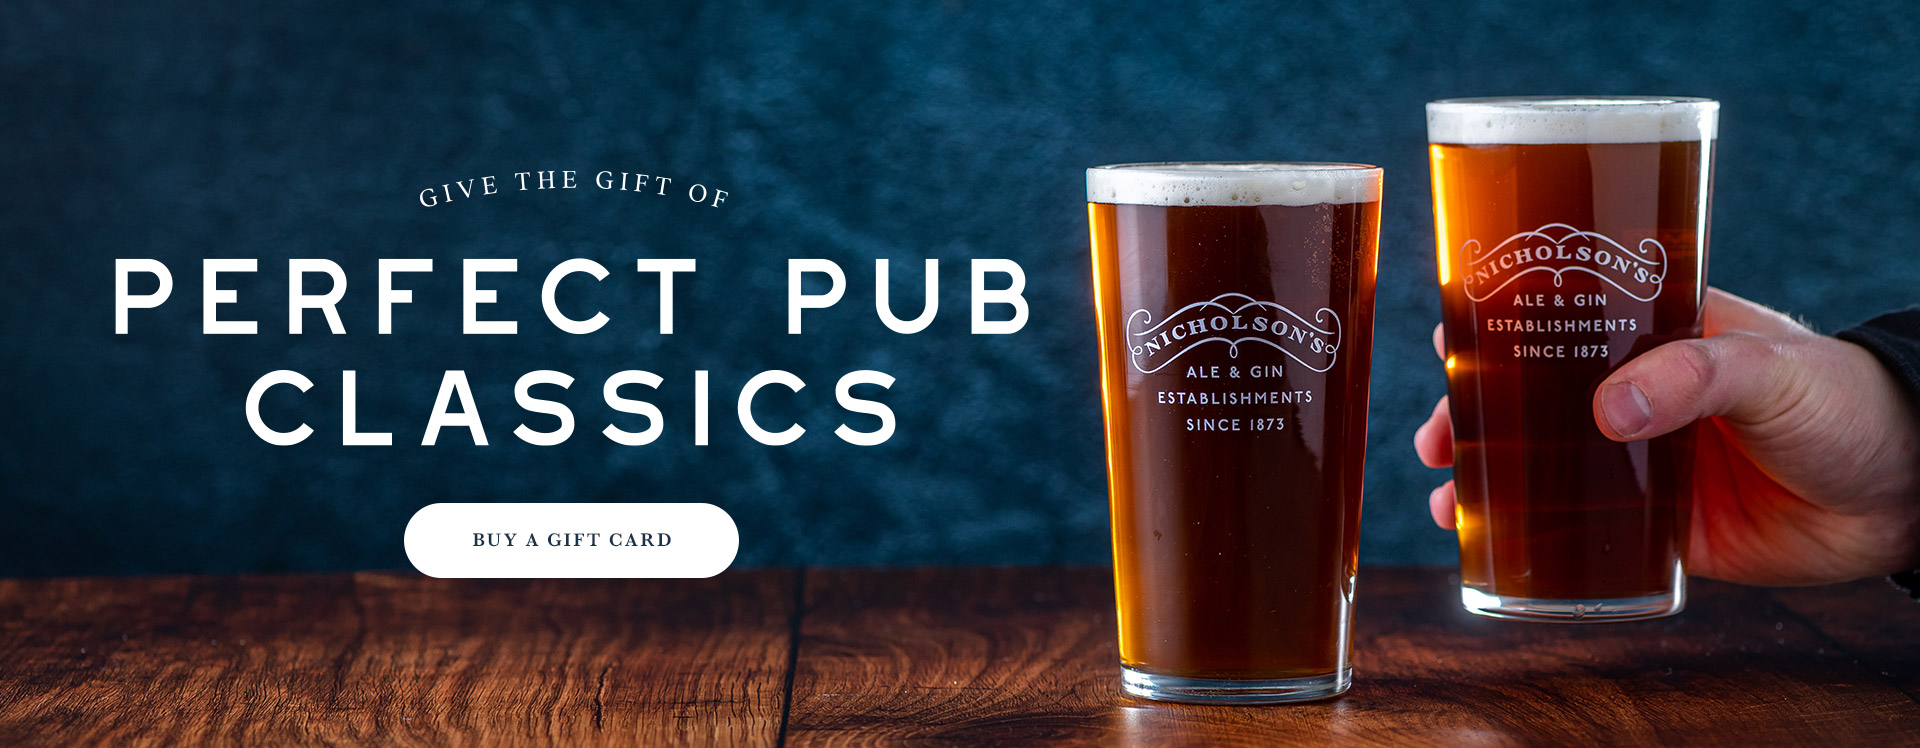 Nicholson’s Pub Gift Voucher at Marquis Of Granby, Rathbone Street in London